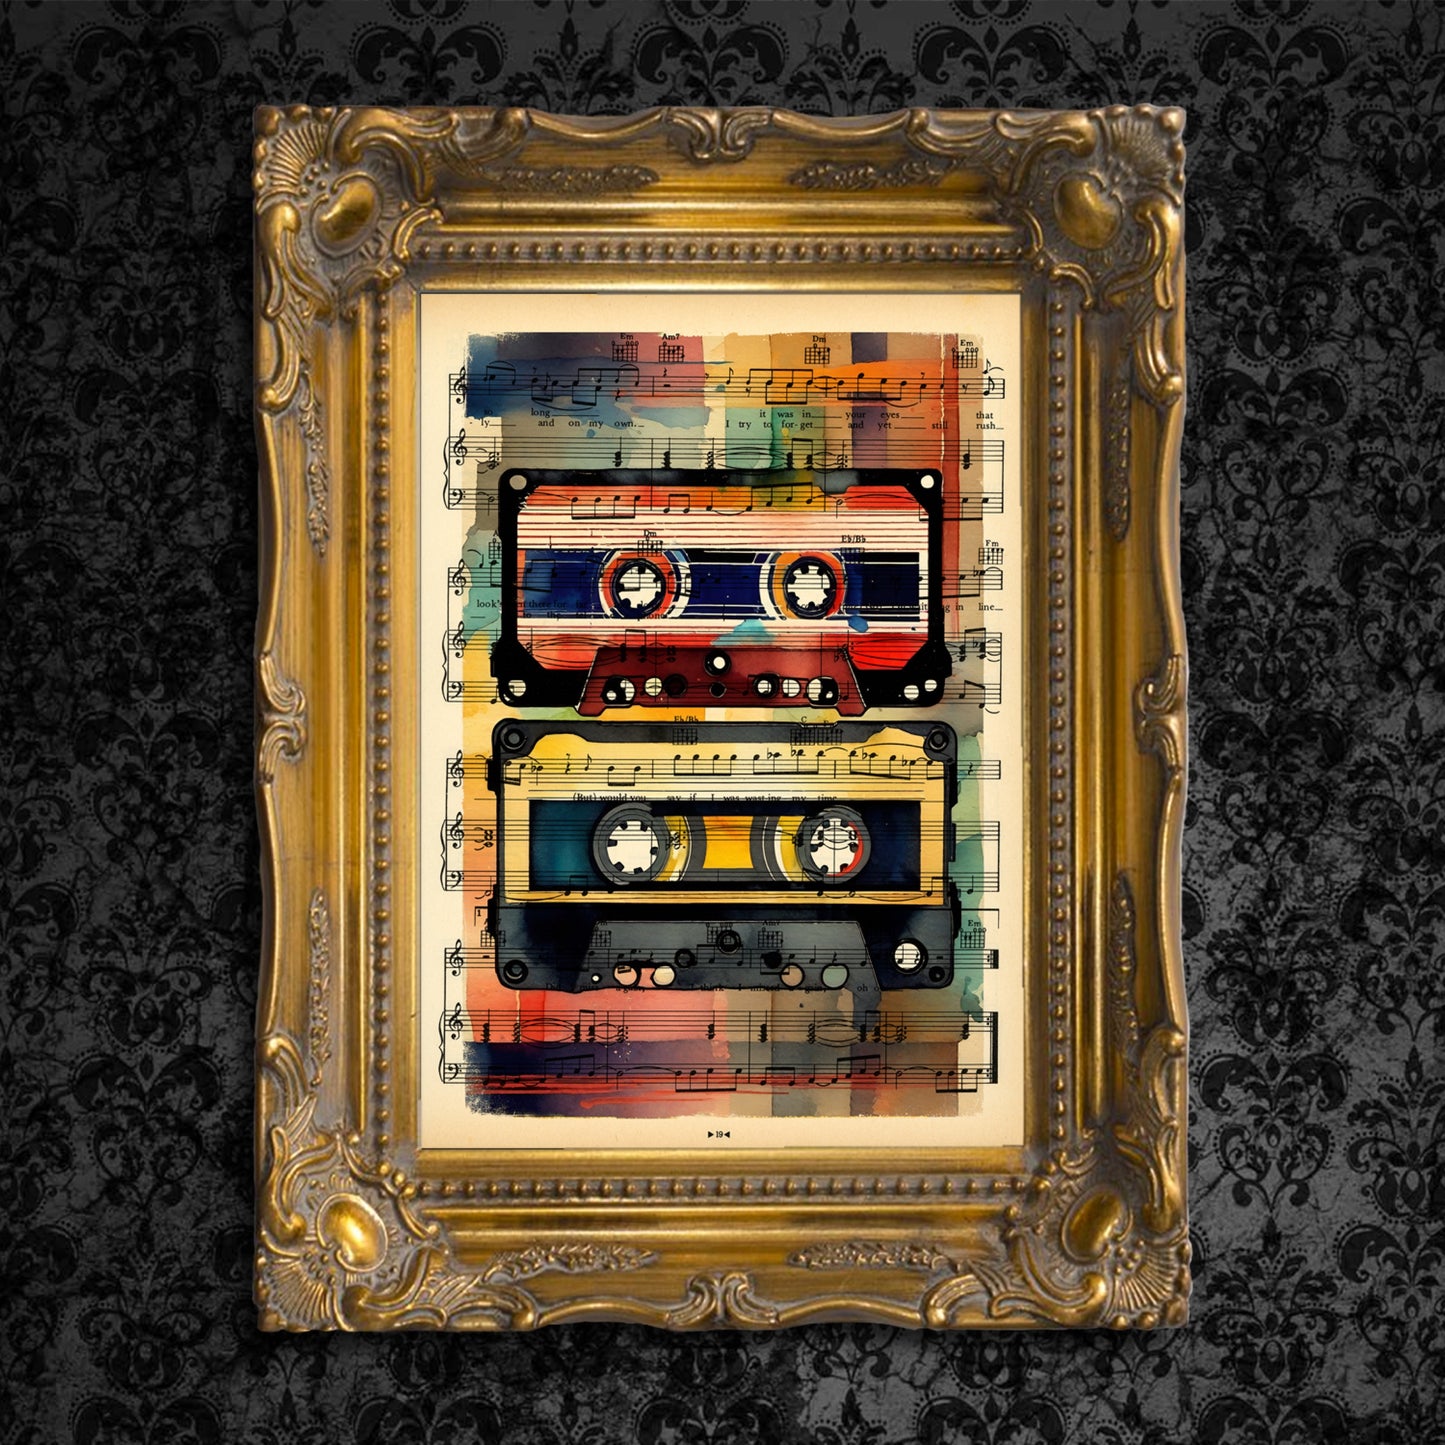 Discover the charm of vintage music with HiFi Retro Audio MixTape.